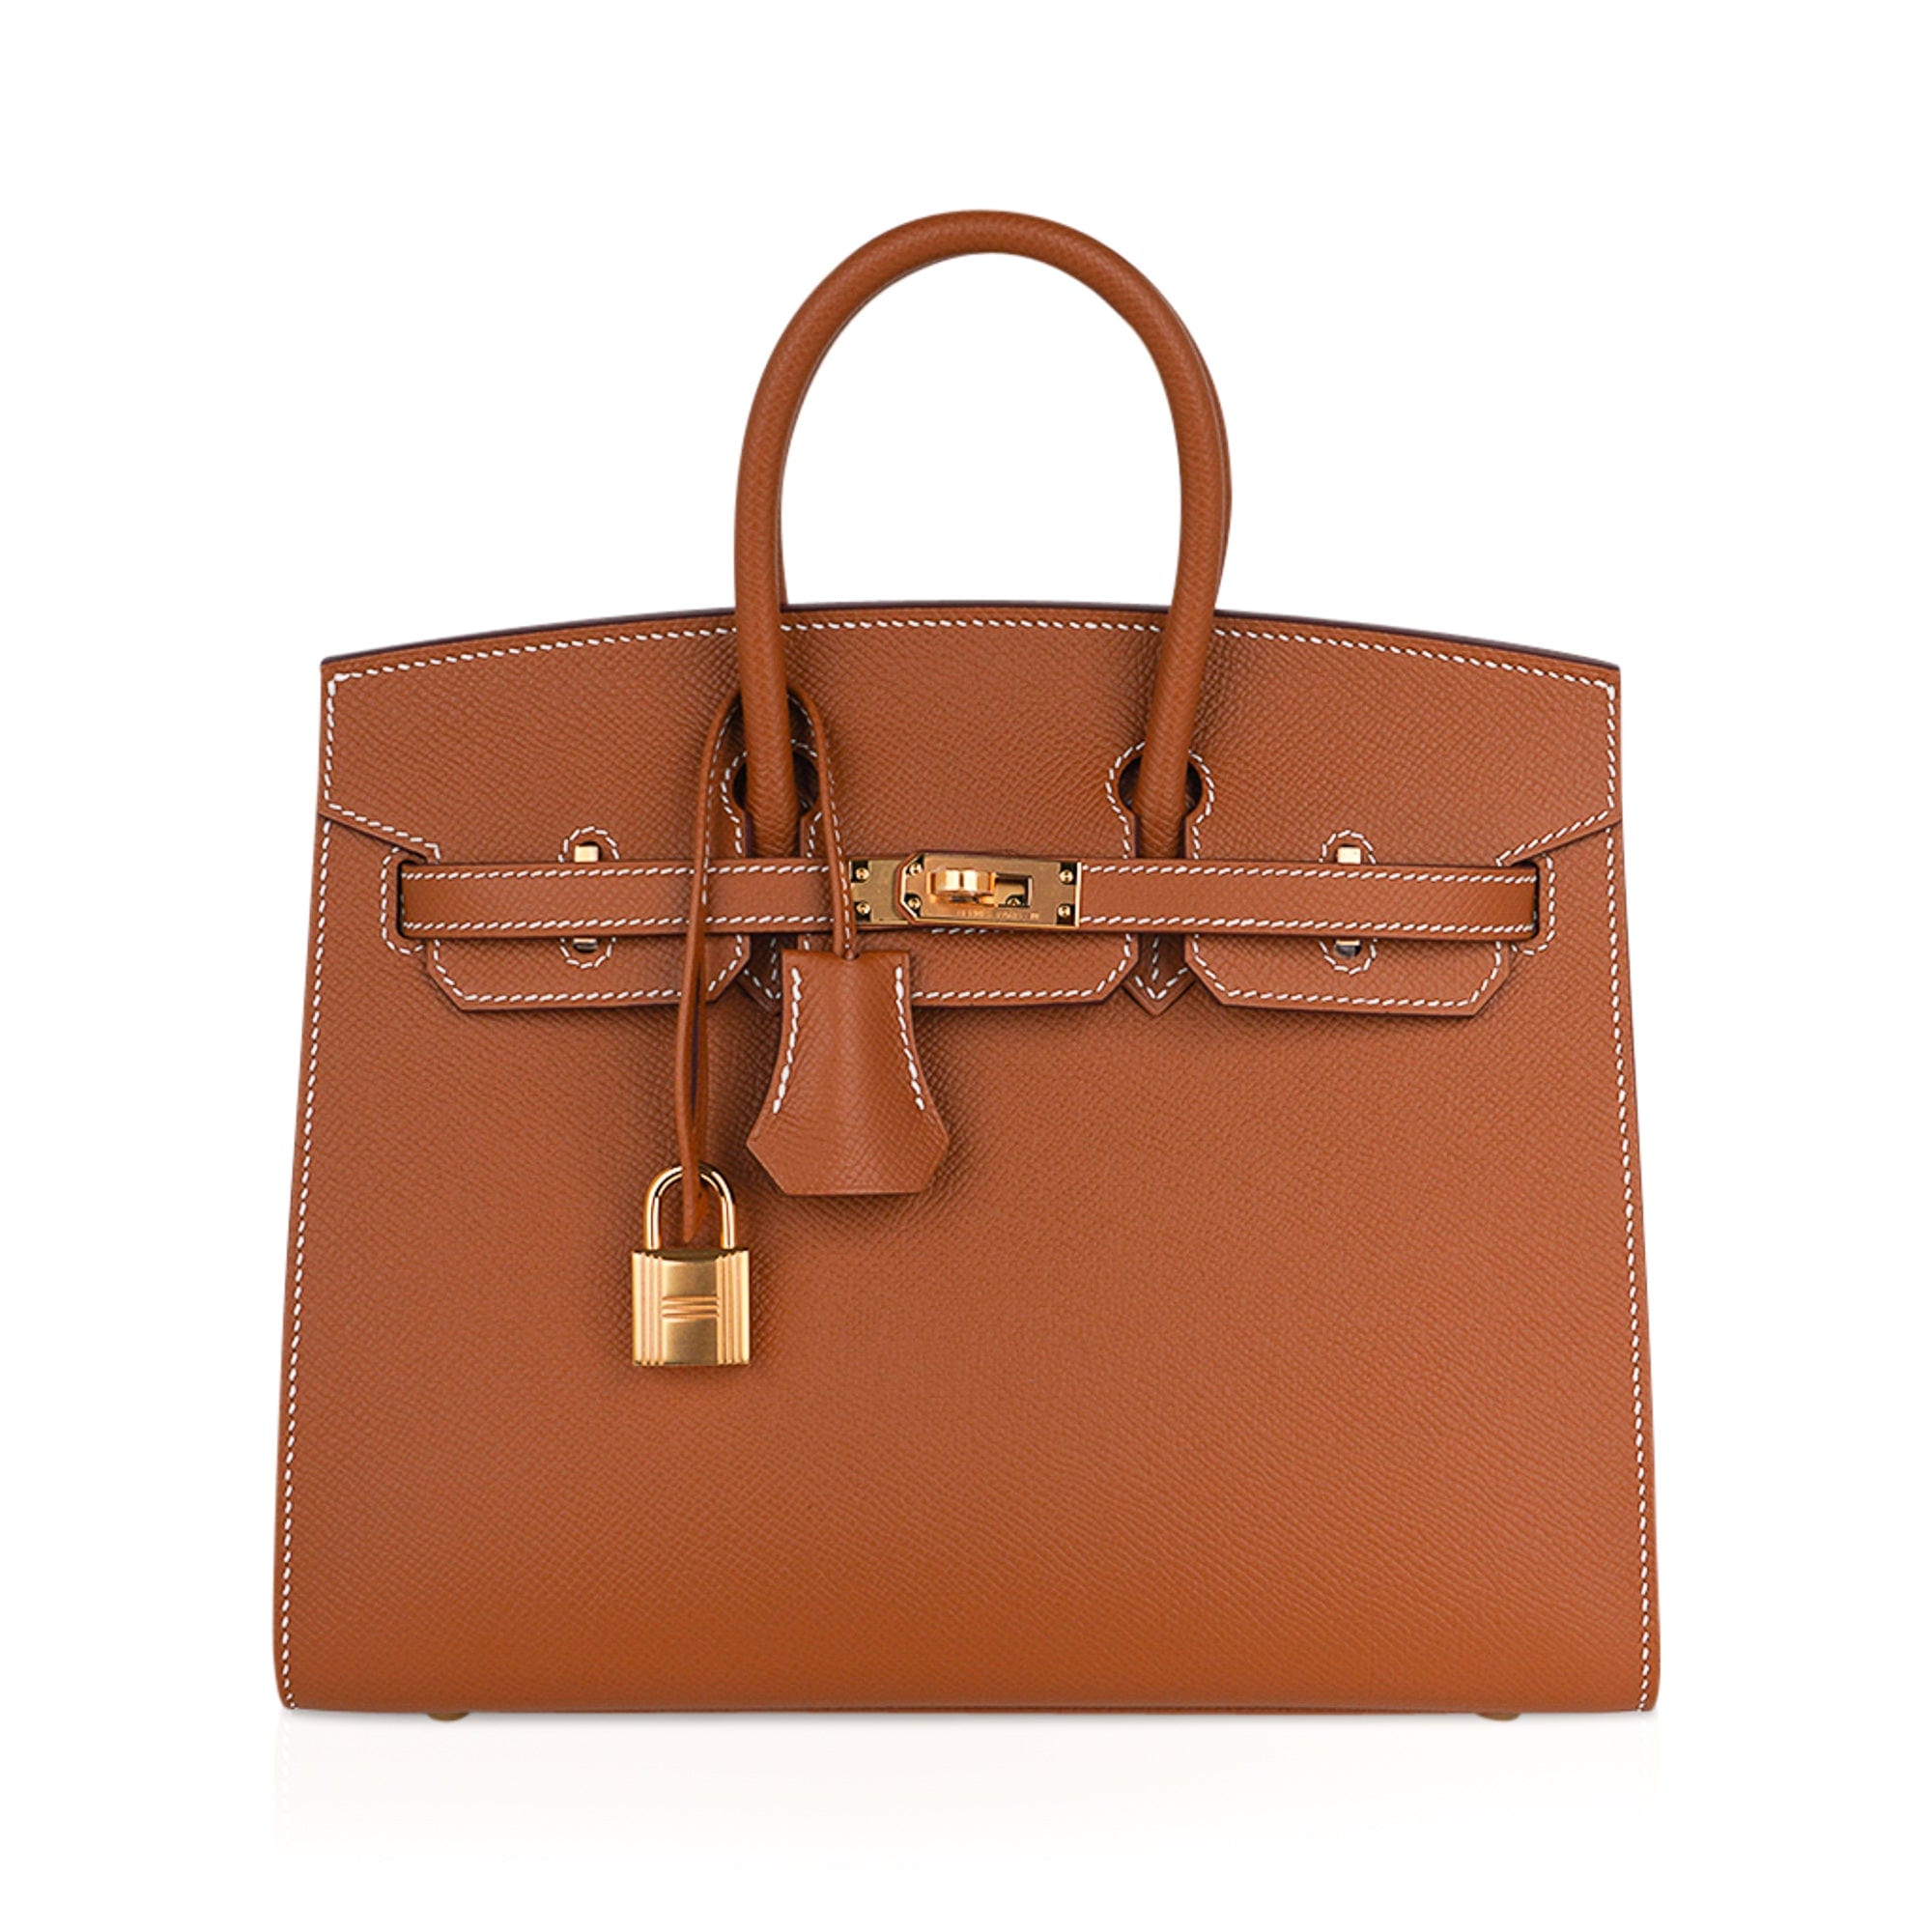 A totally hand stitched birkin 25cm bag in 37 gold epsom leather